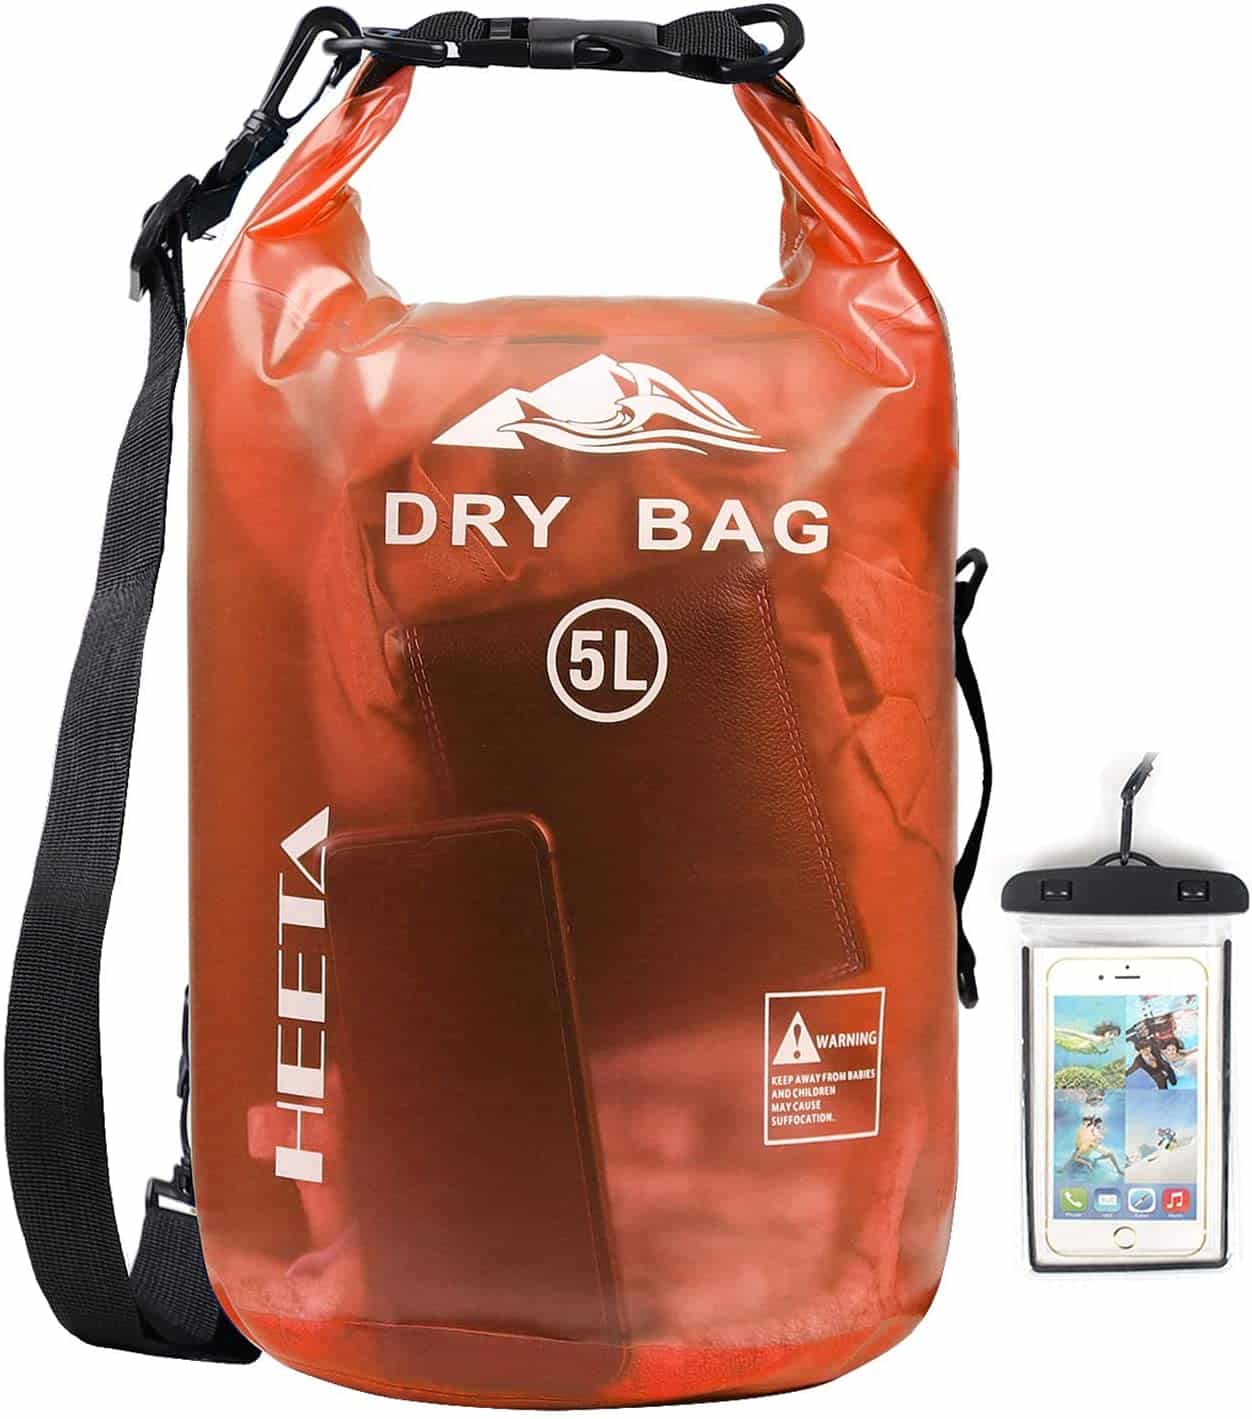 Dry Bag for Those Who Love Skiing Adventures